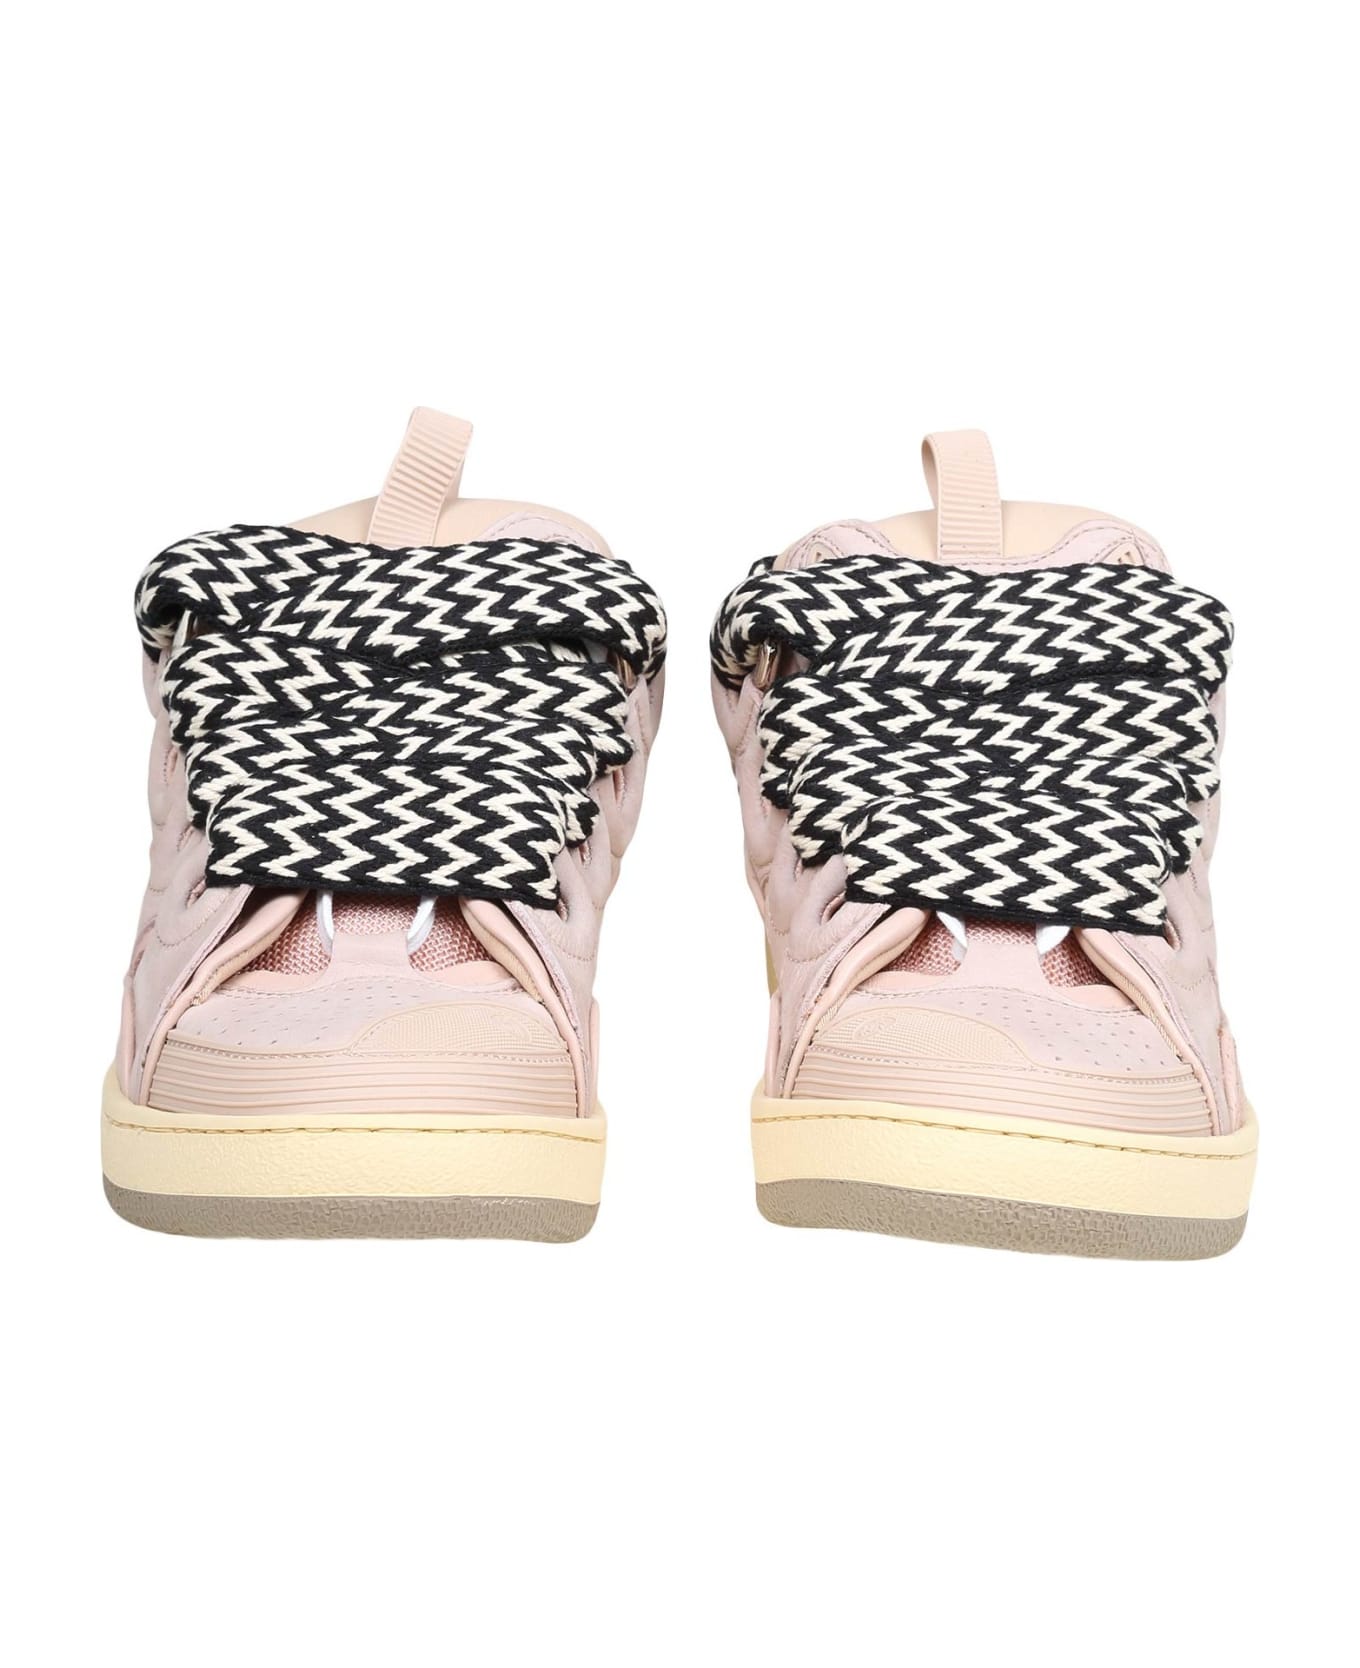 Lanvin Skate Sneakers In Pink Leather - Pink スニーカー